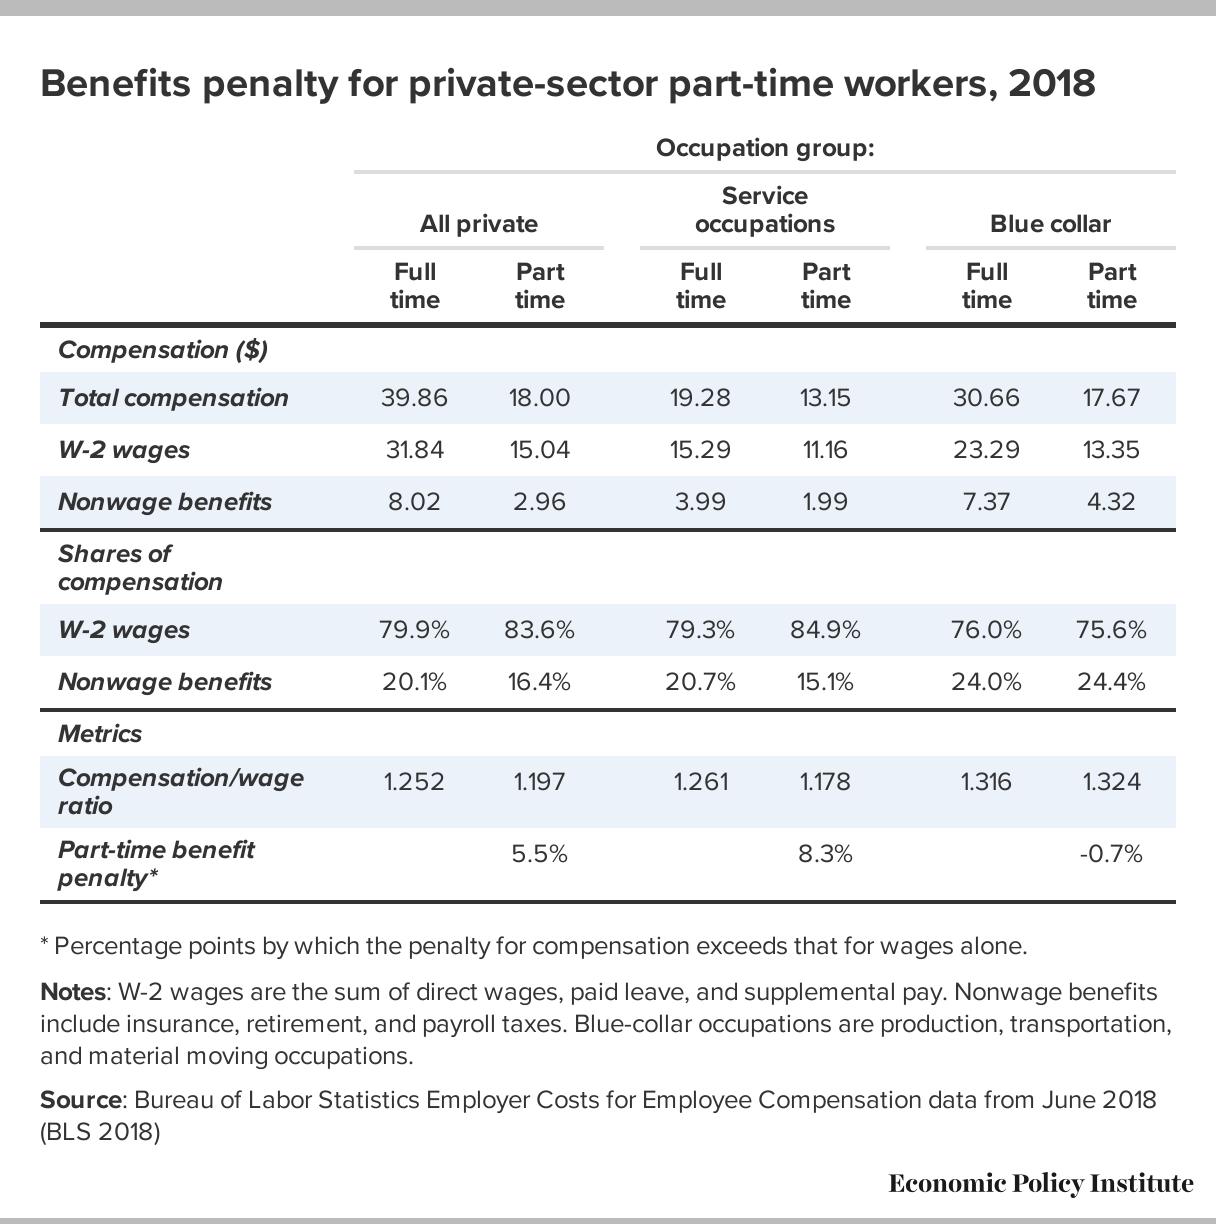 Golden Part Time Workers Pay A Big Time Penalty Hourly Wages And Benefits Penalties For Part Time Work Are Largest For Those Seeking Full Time Jobs And For Men But Affect More Women Economic Policy Institute